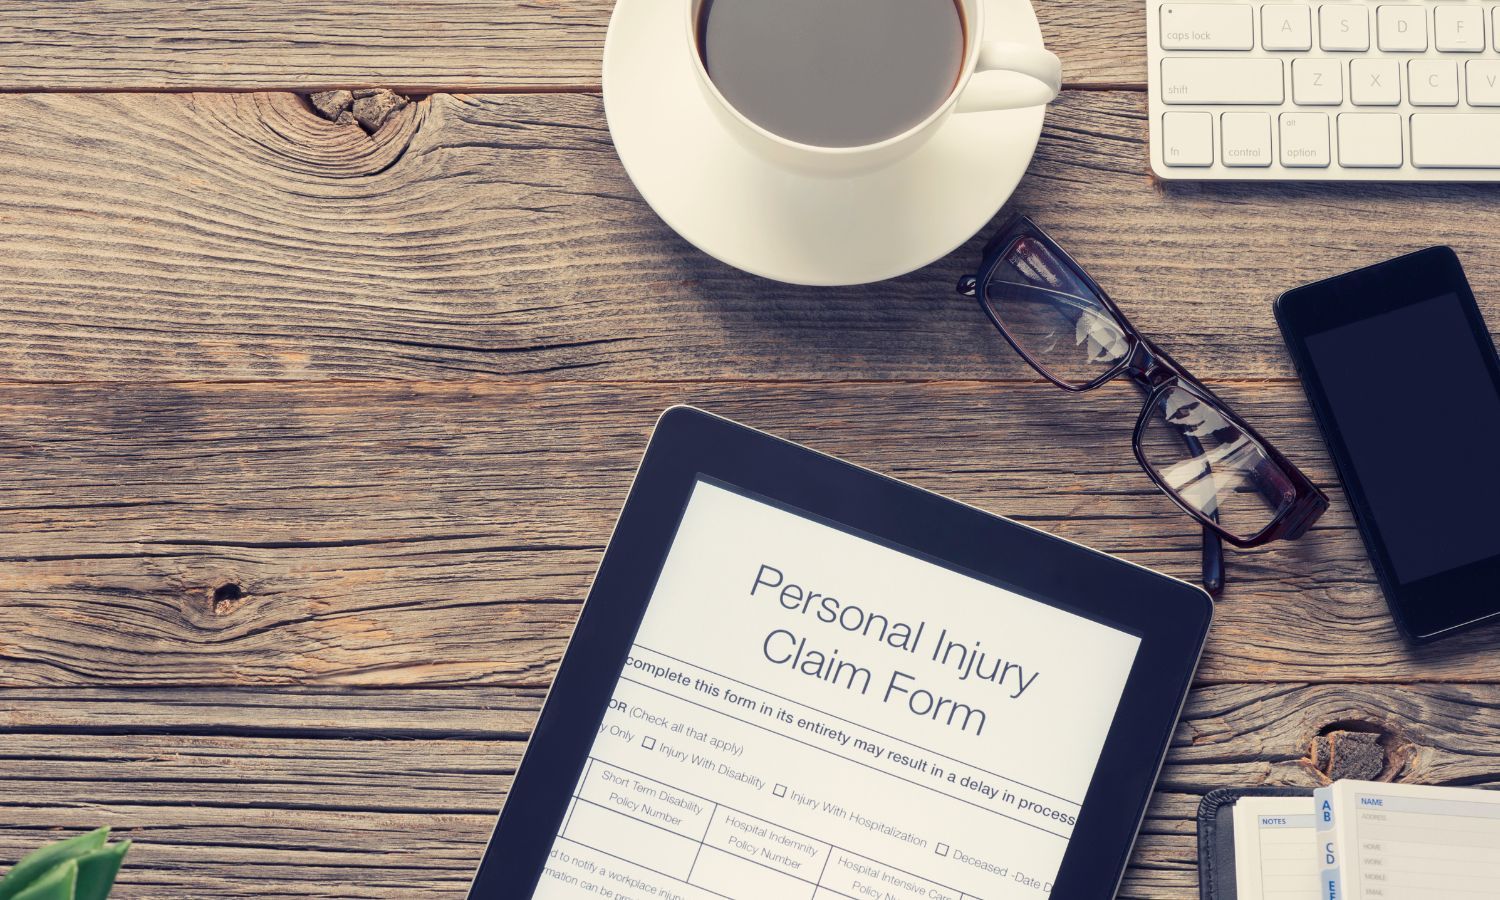 How Can I Fund My Personal Injury Claim?